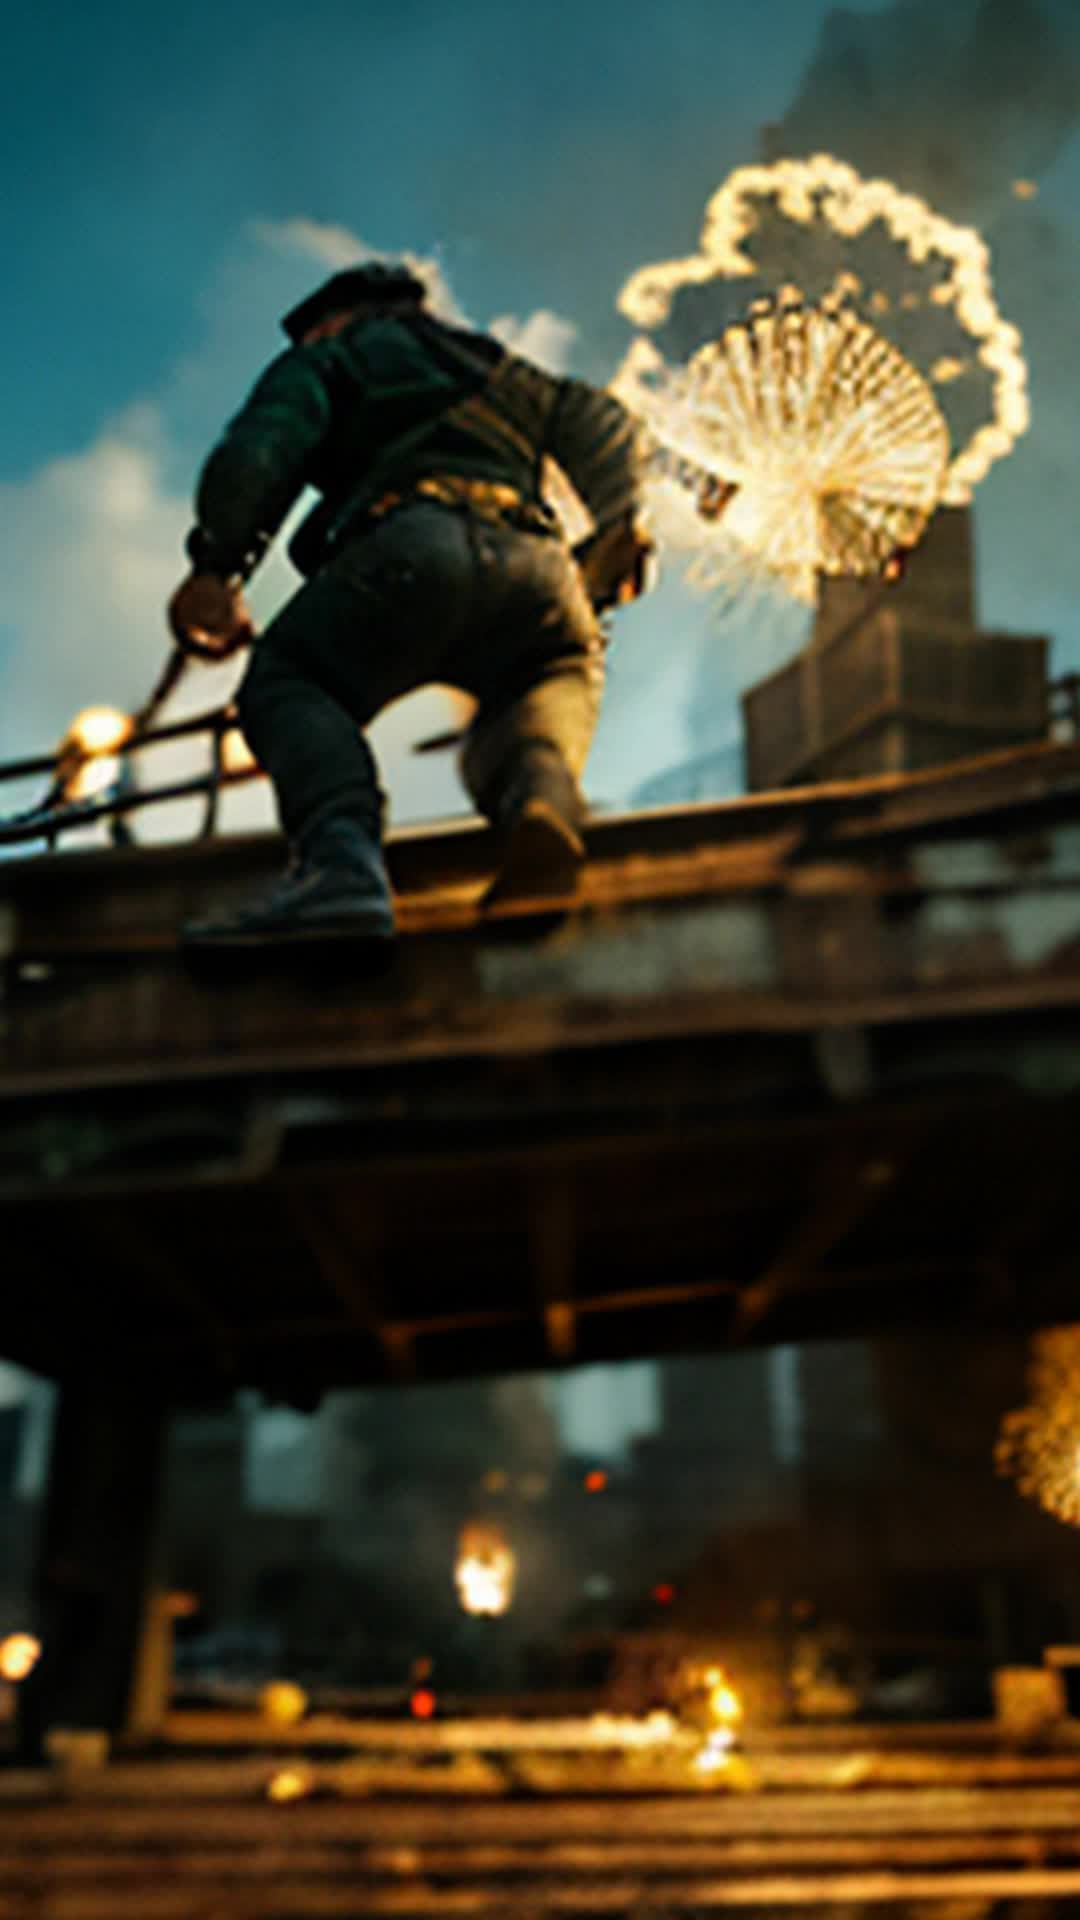 Nathan leaping onto rusted catwalk, hurling makeshift EMP grenade, sparks flying, drones disabling, small triumph, oppressive taxes, gritty industrial background, dynamic action shot, sharp focus, soft shadows